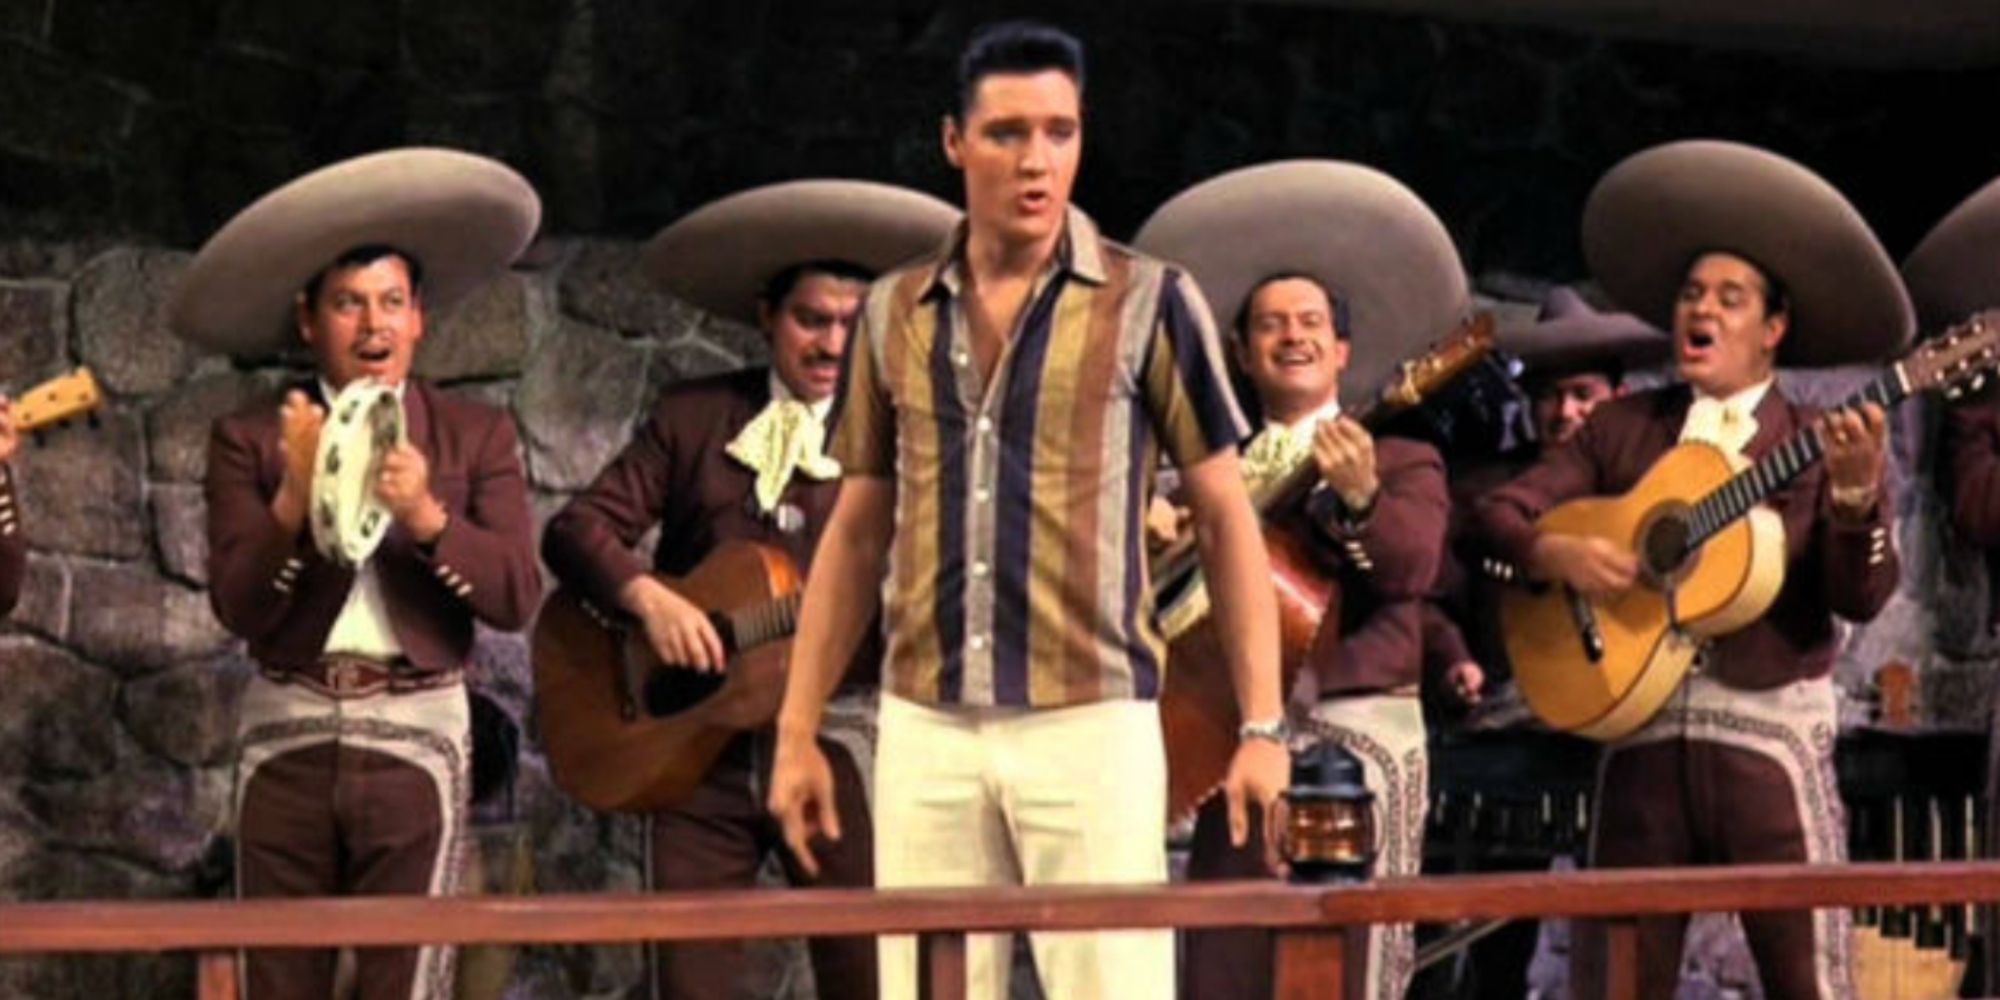 Elvis Presley with a mariachi band behind him singing